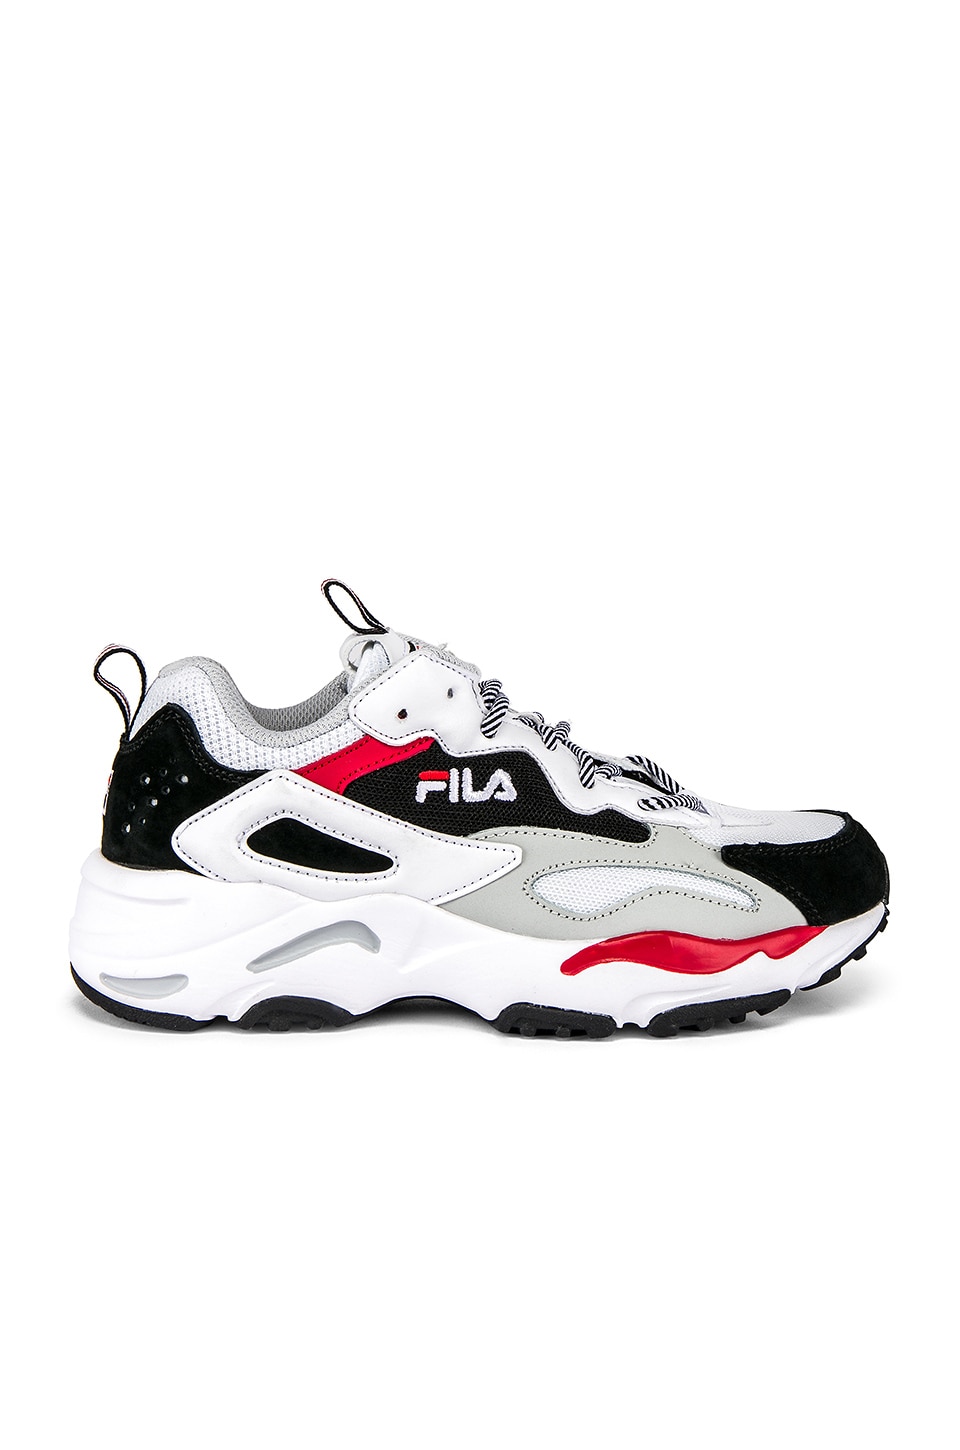 red black and white filas